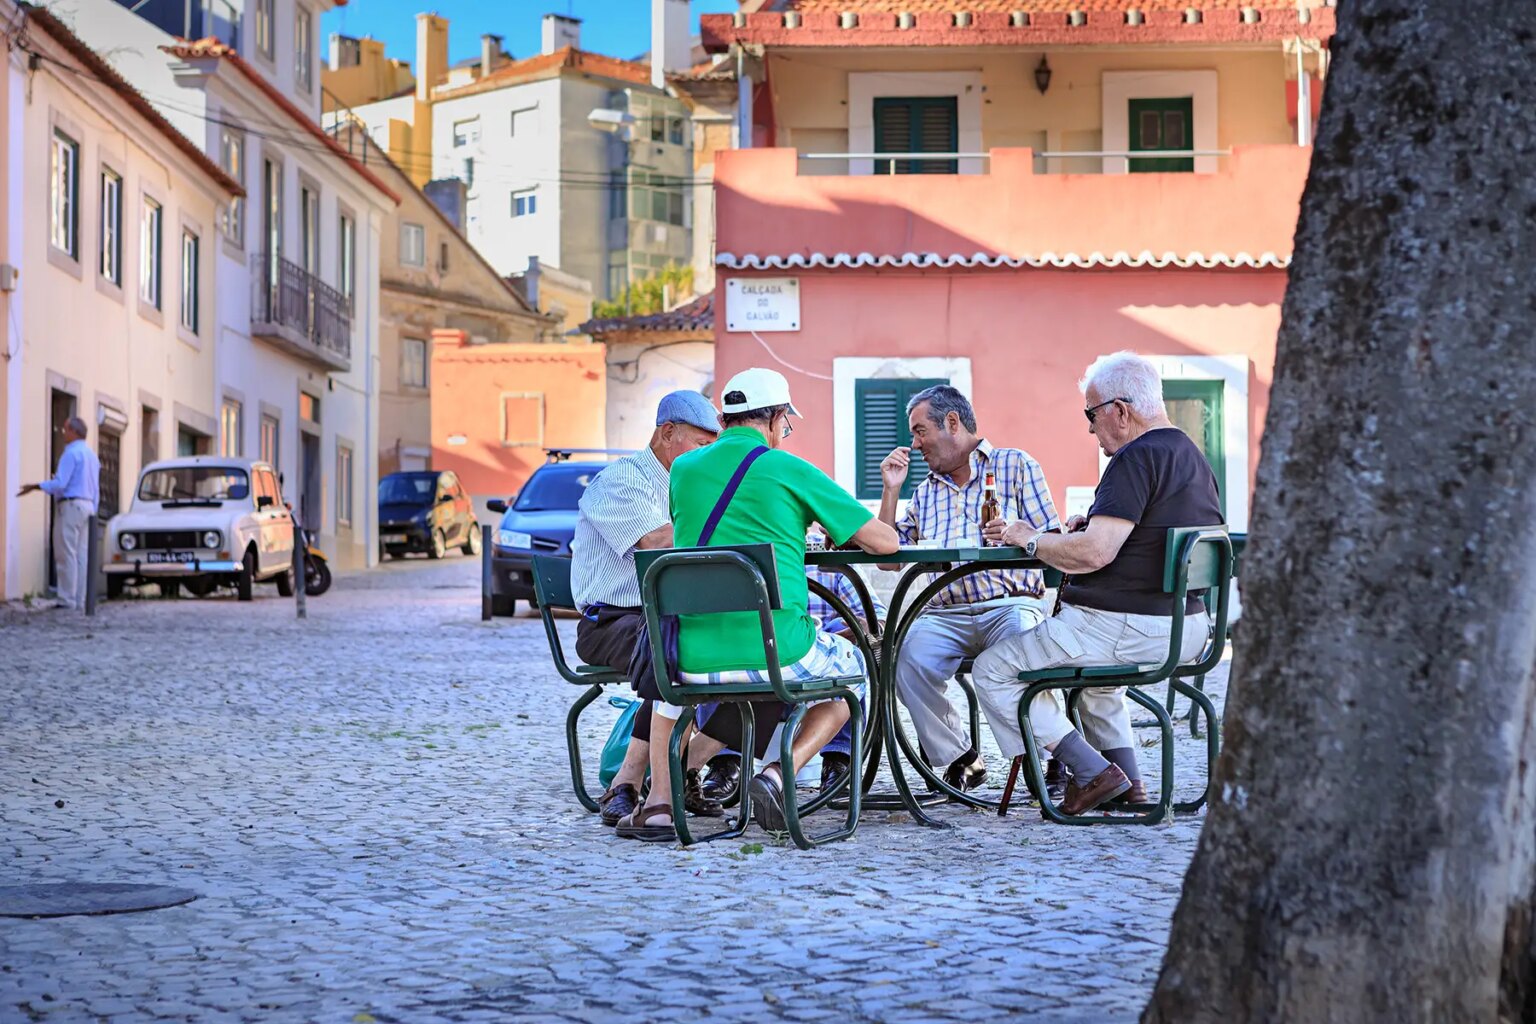 Pensions in Portugal